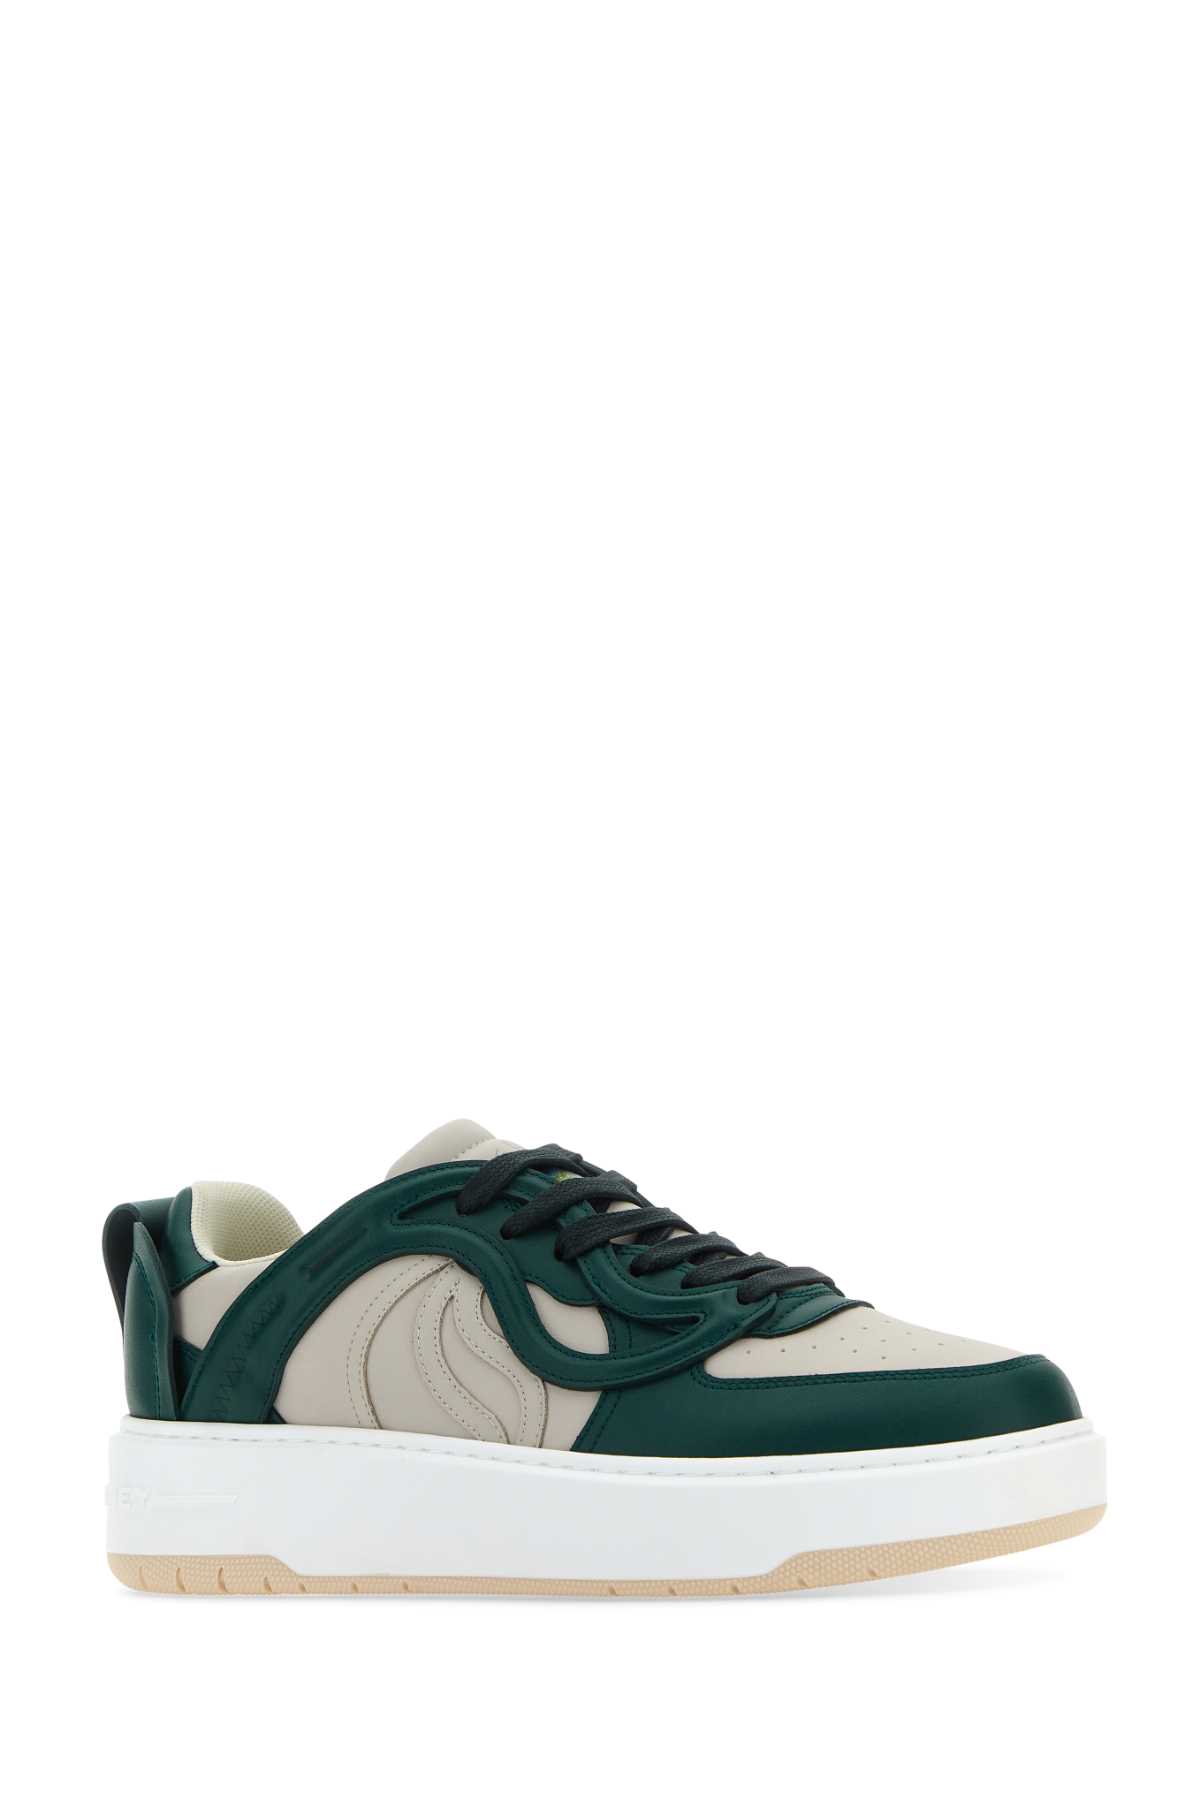 Stella Mccartney Two-tone Alter Mat S Wave 1 Sneakers In Greencream